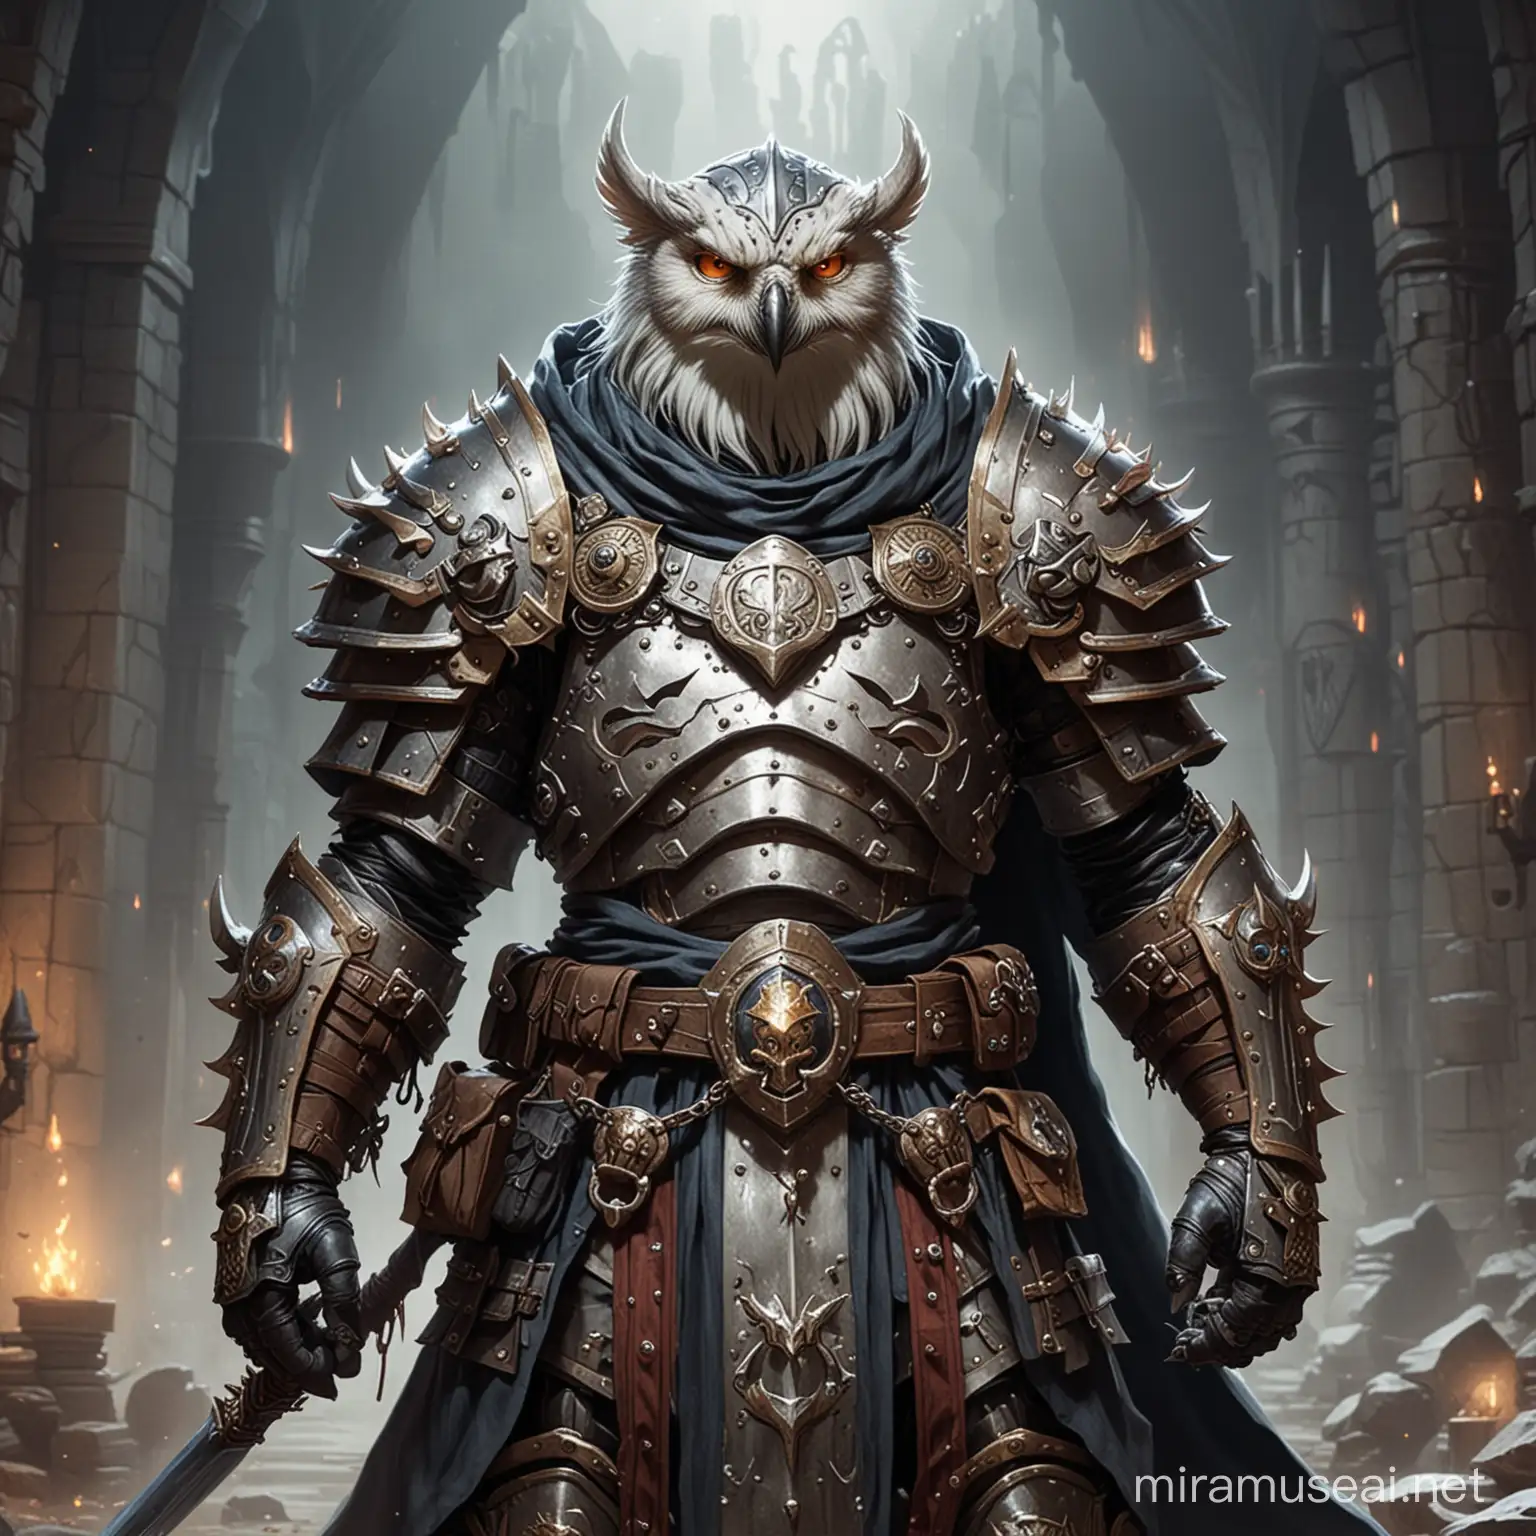 Owlin death domain cleric in heavy armor in the world of Dungeons and Dragons